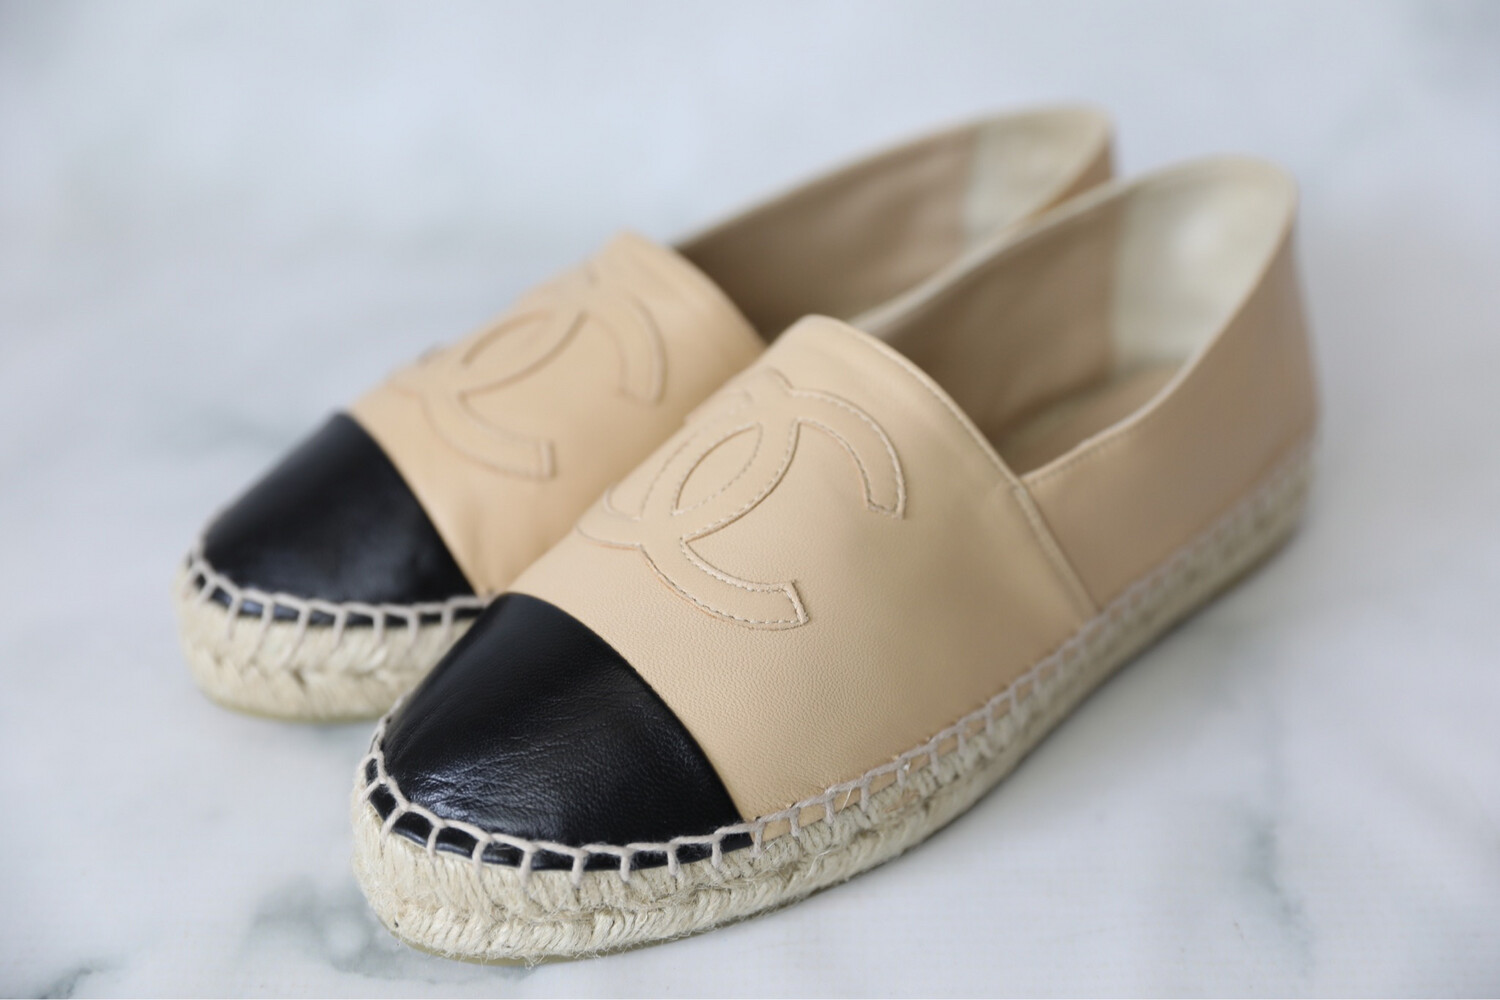 Chanel Espadrilles Size 38, Black And Beige Lambskin Leather, New In Box,  WA001